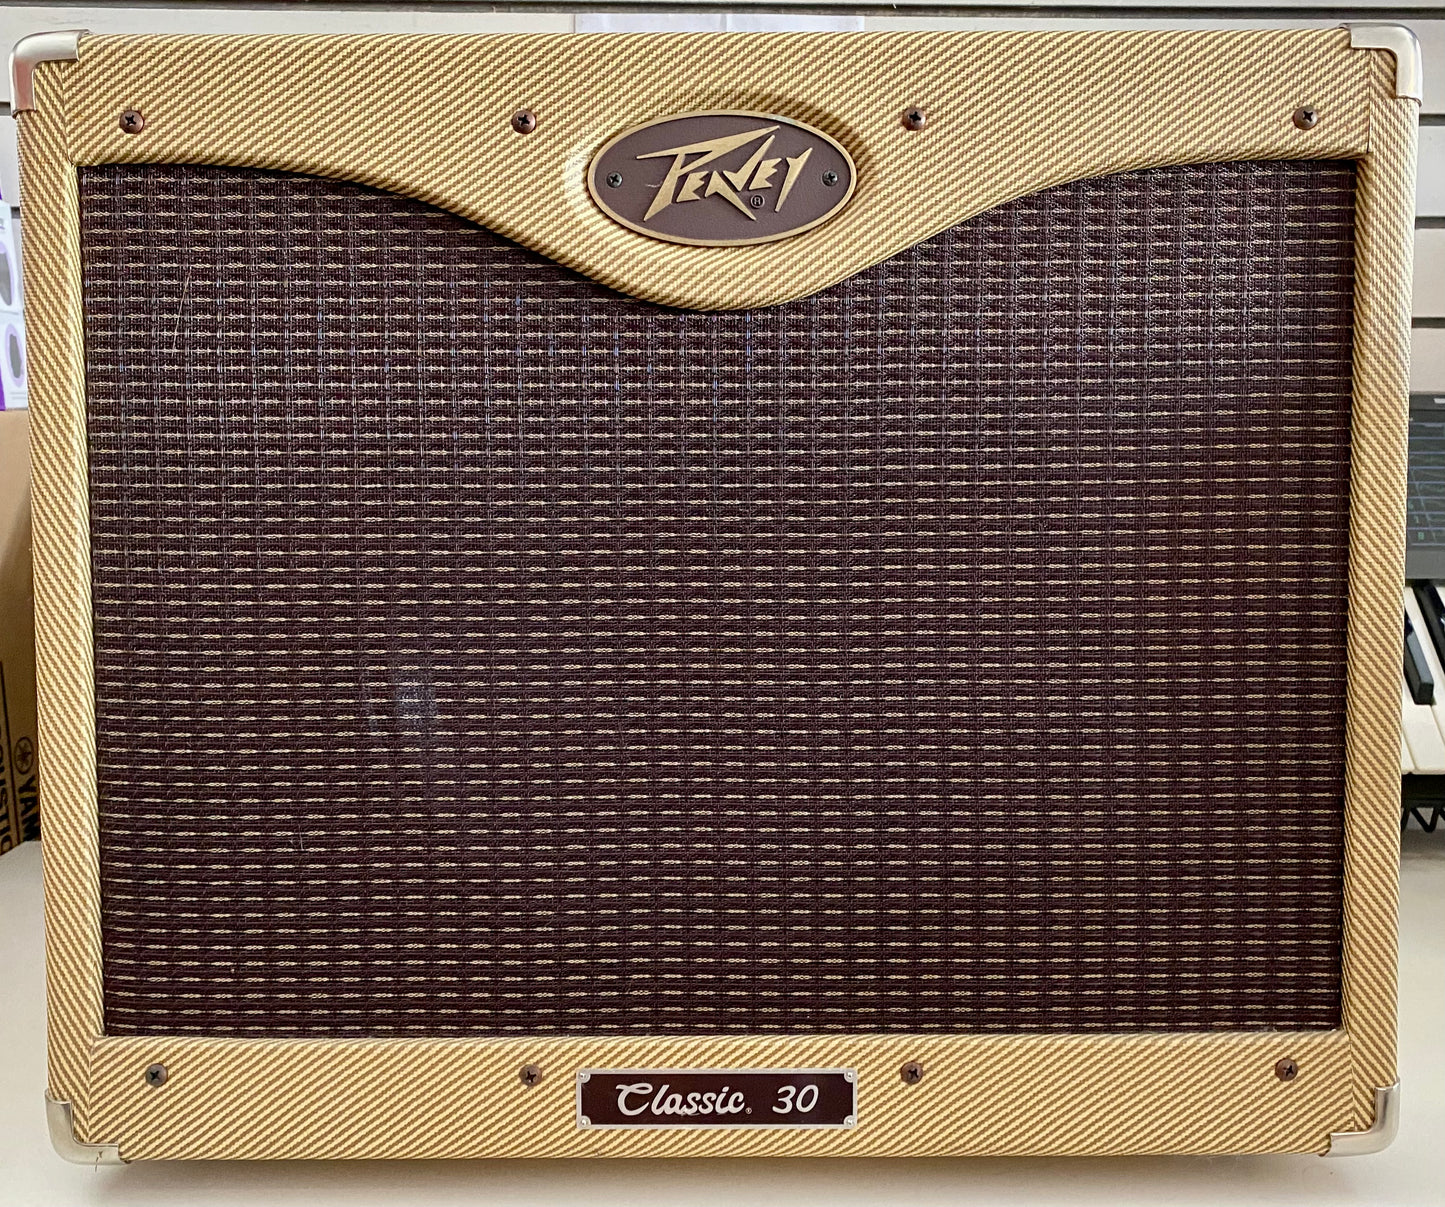 Used Peavey Classic® 30 112 Guitar Combo Guitar Amp Made in USA